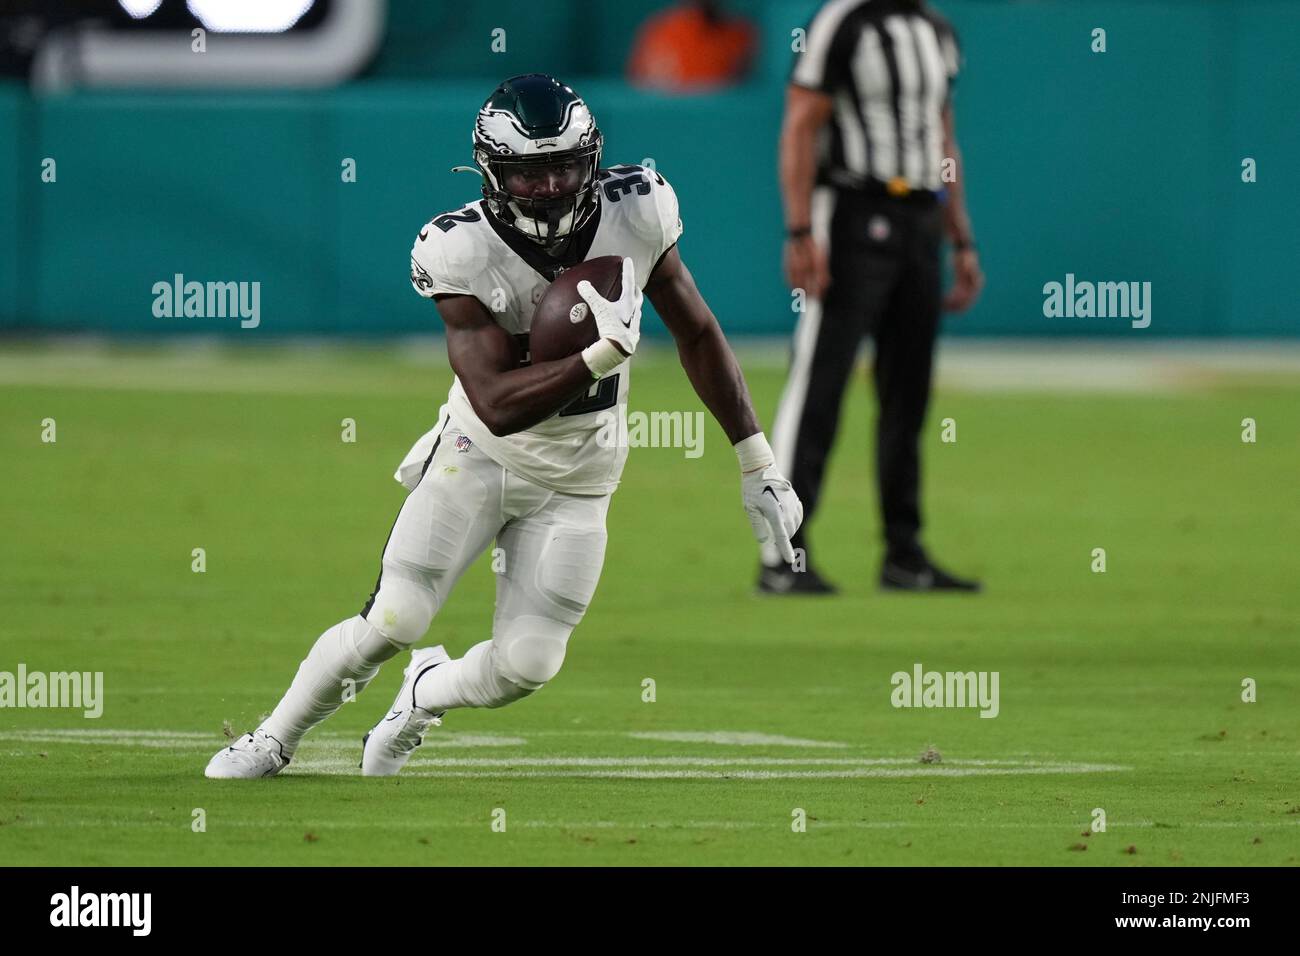 MIAMI GARDENS, FL - AUGUST 27: Philadelphia Eagles running back Jason  Huntley (32) runs for positive yardage during the game between the  Philadelphia Eagles and the Miami Dolphins, on Saturday, August 27